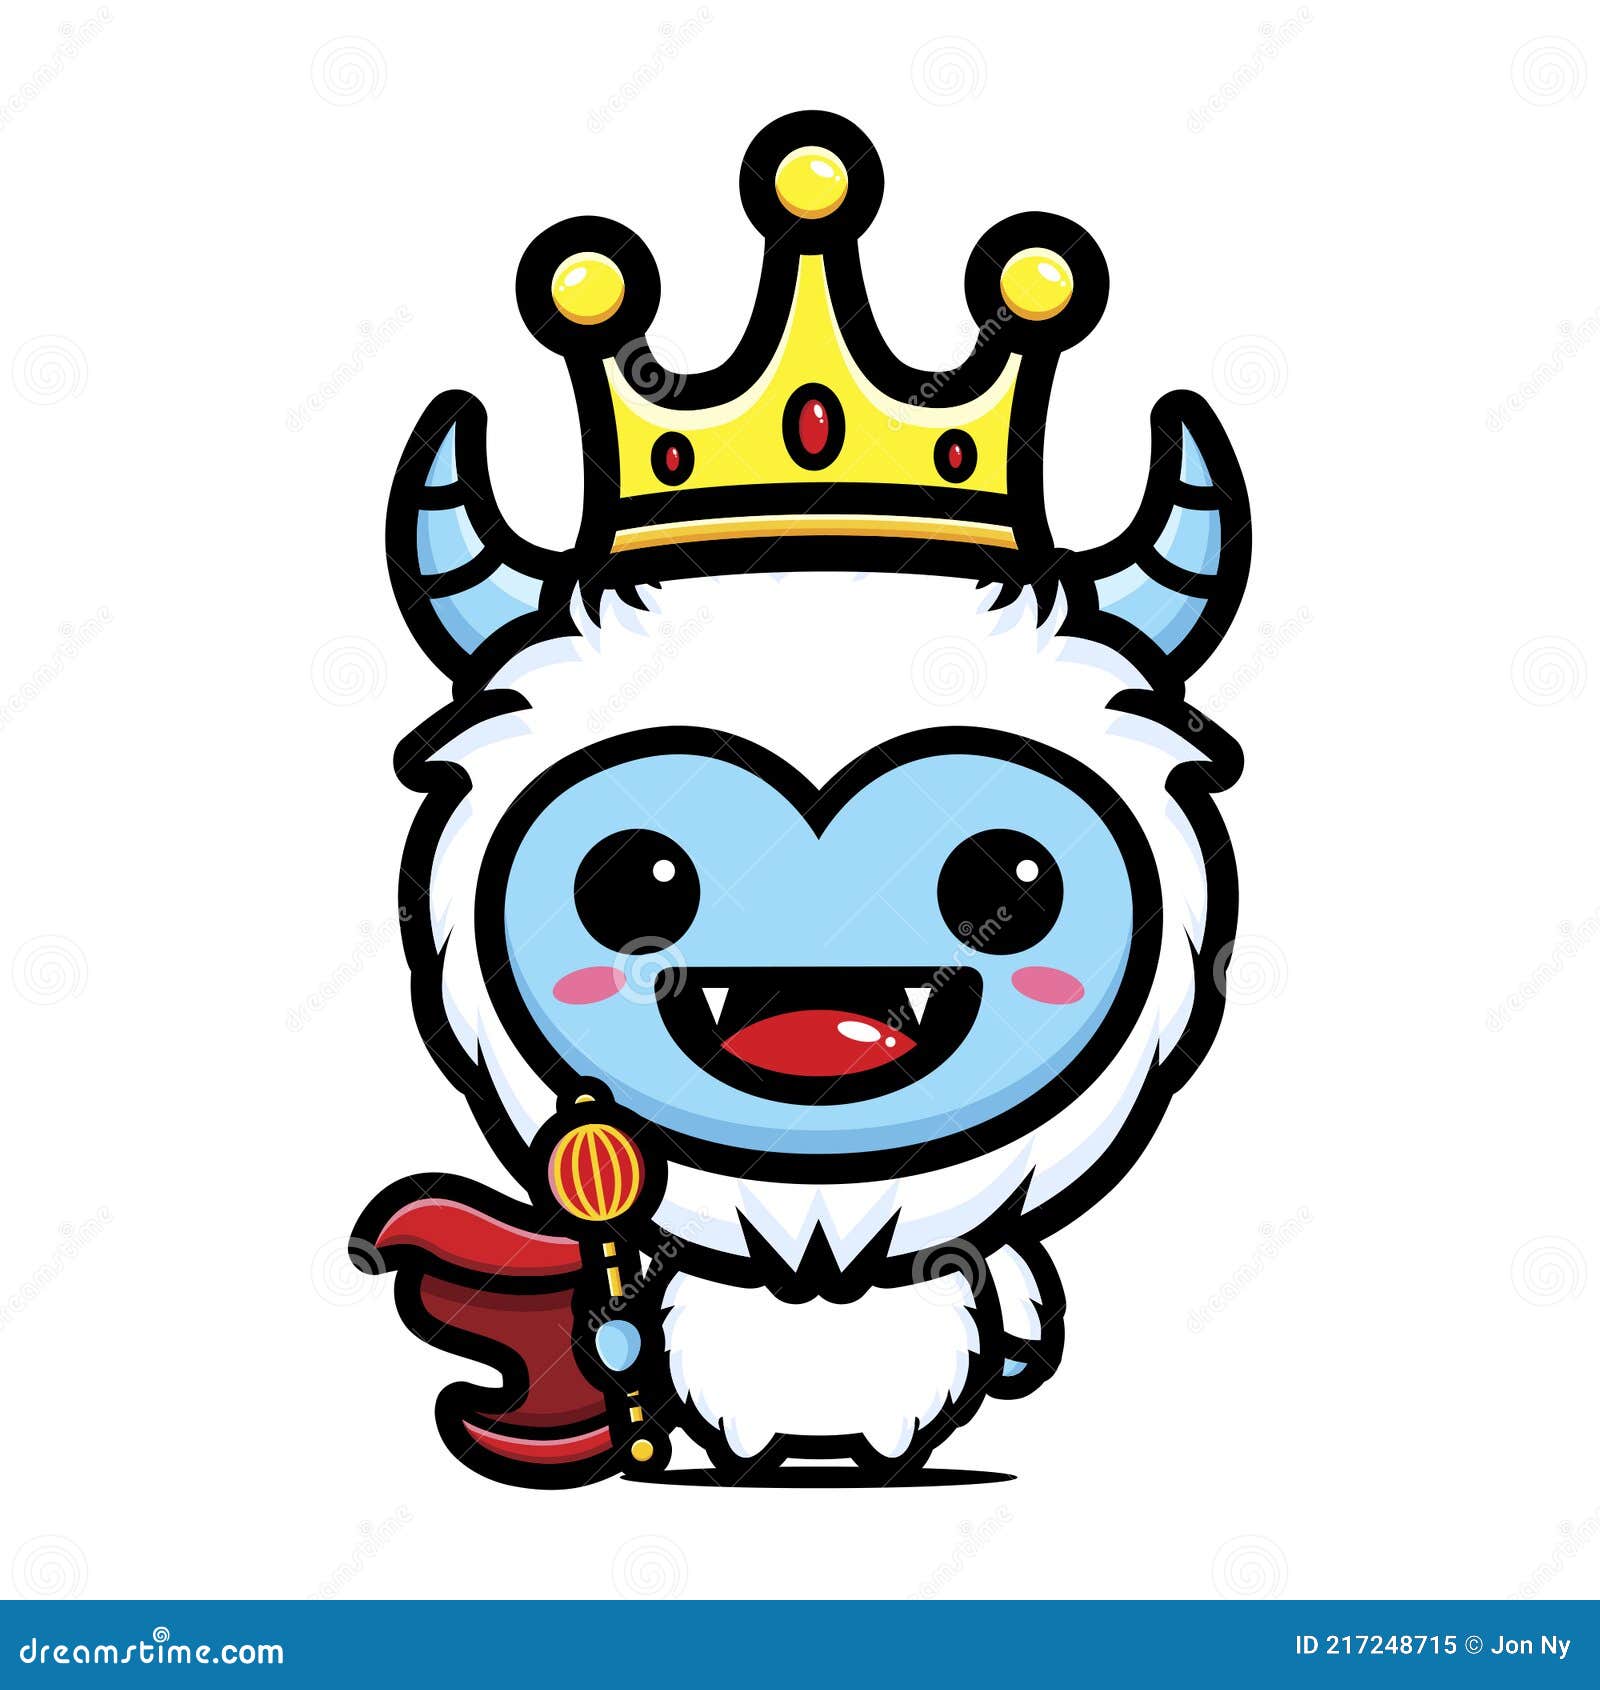 Cute Yeti Animal Cartoon Characters Become King of Yeti Animals Wearing  Crowns Stock Vector - Illustration of cute, isolated: 217248715